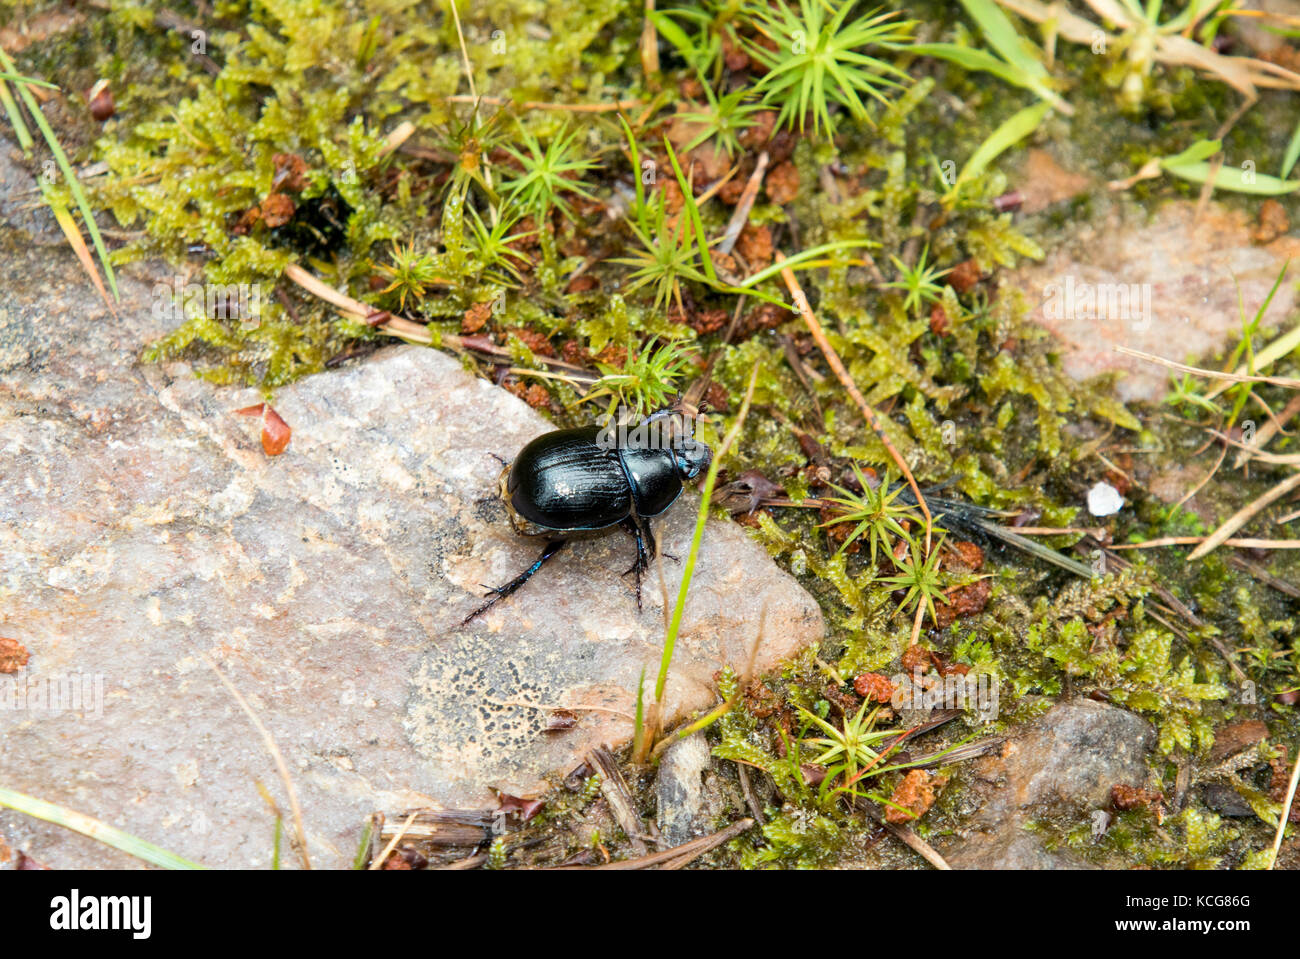 Dung beetle on path in Scottish Highlands Stock Photo